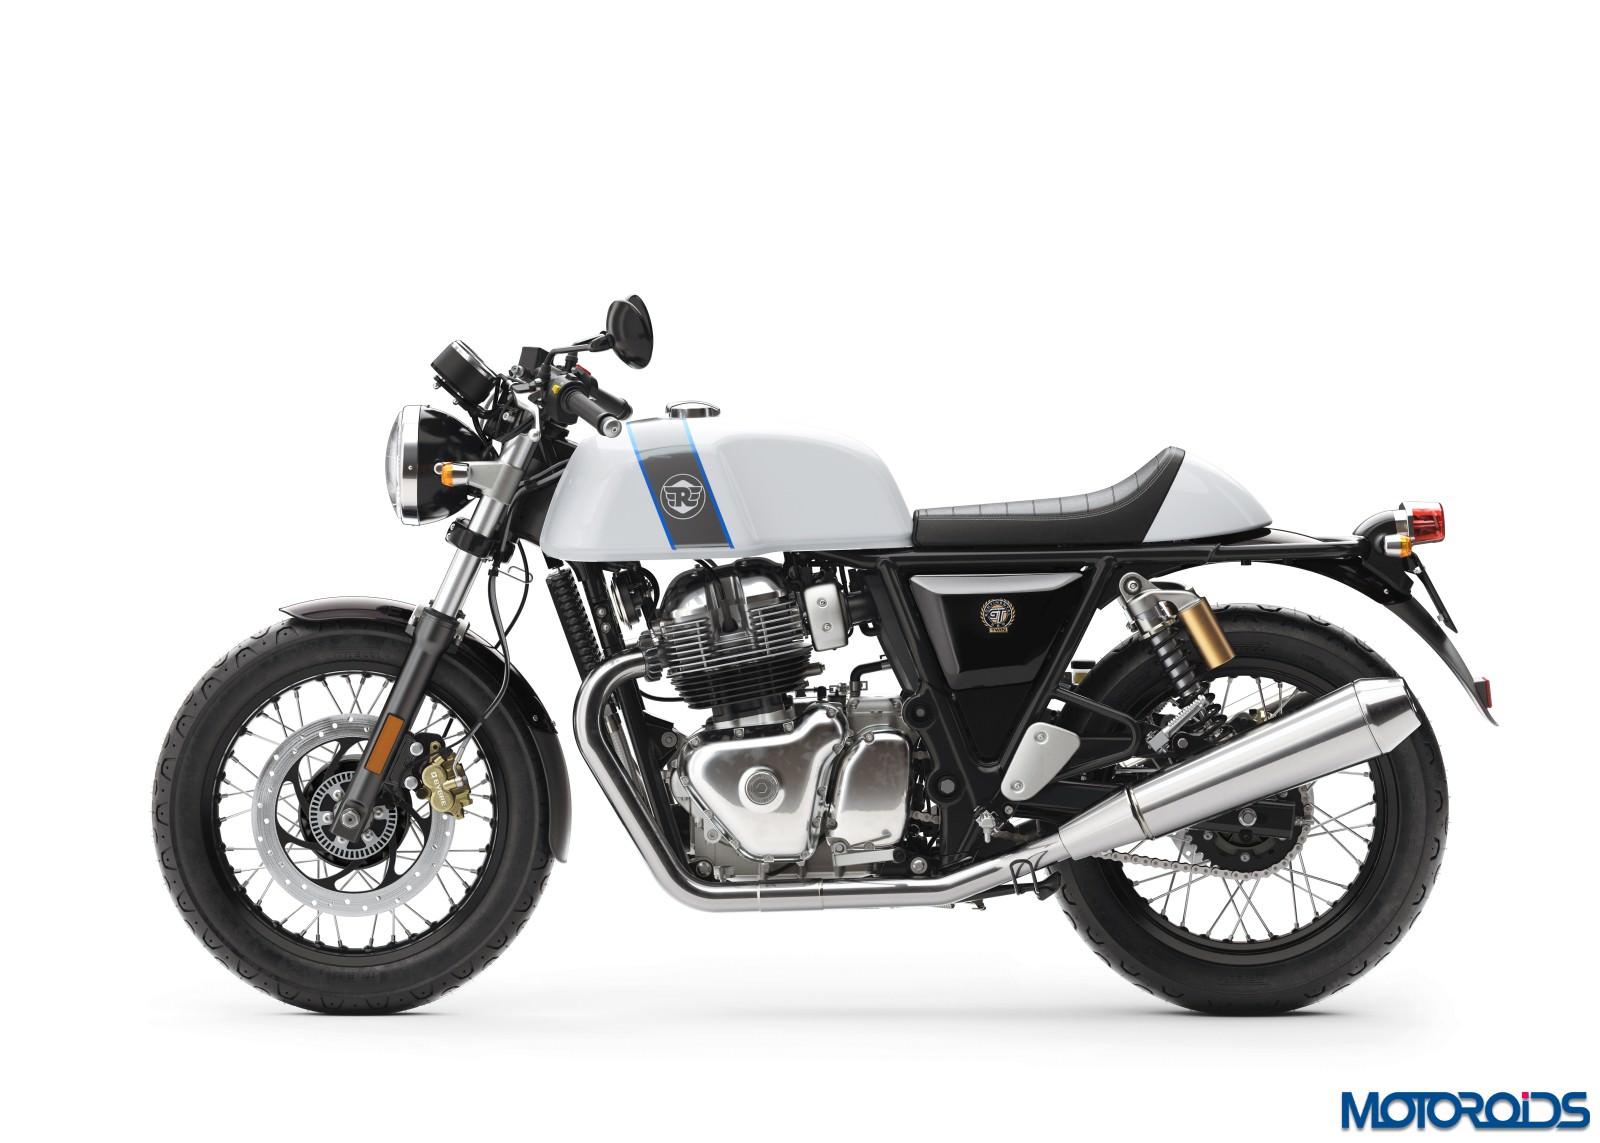 New 2018 Royal Enfield Continental GT 650, Image, Tech Specs